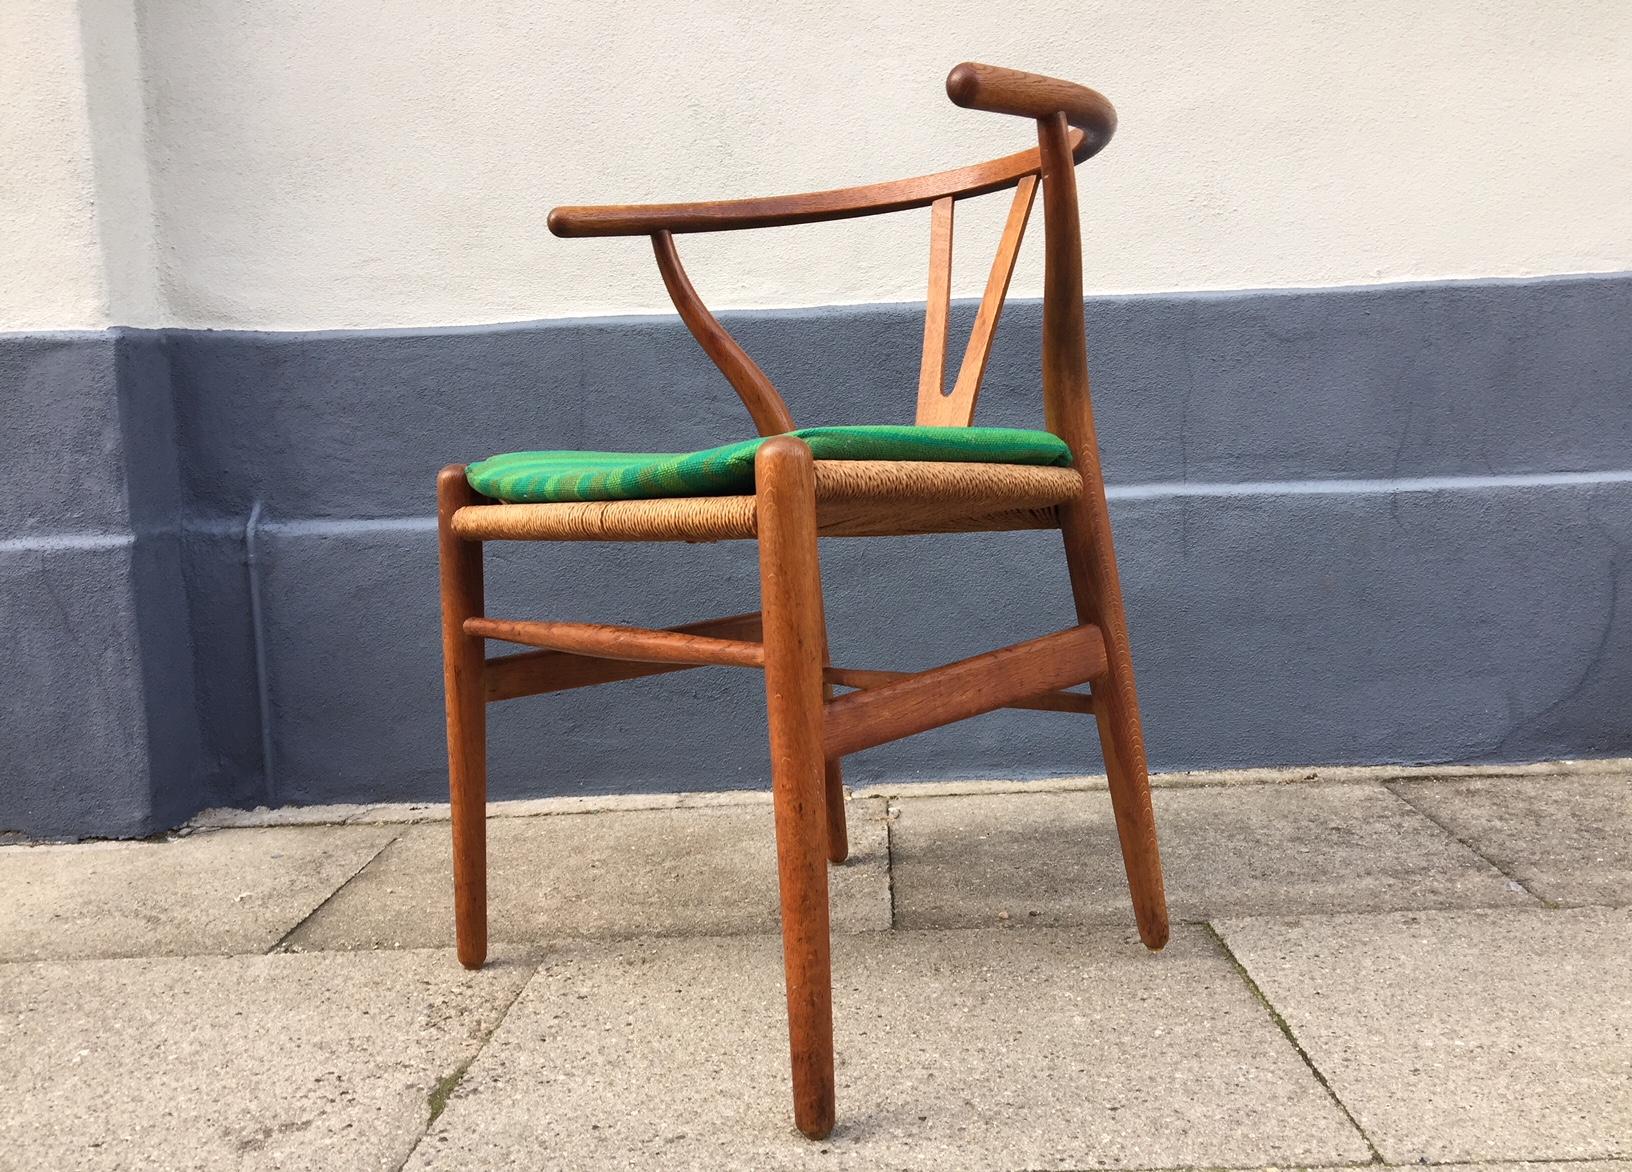 The CH24, Wishbone or Y-Chair was designed by Danish architect Hans Jørgen Wegner in 1949. This model was fashioned out of oak and manufactured by Carl Hansen & Søn in Denmark during the 1960s. The green period seat-cushion is included. The chair